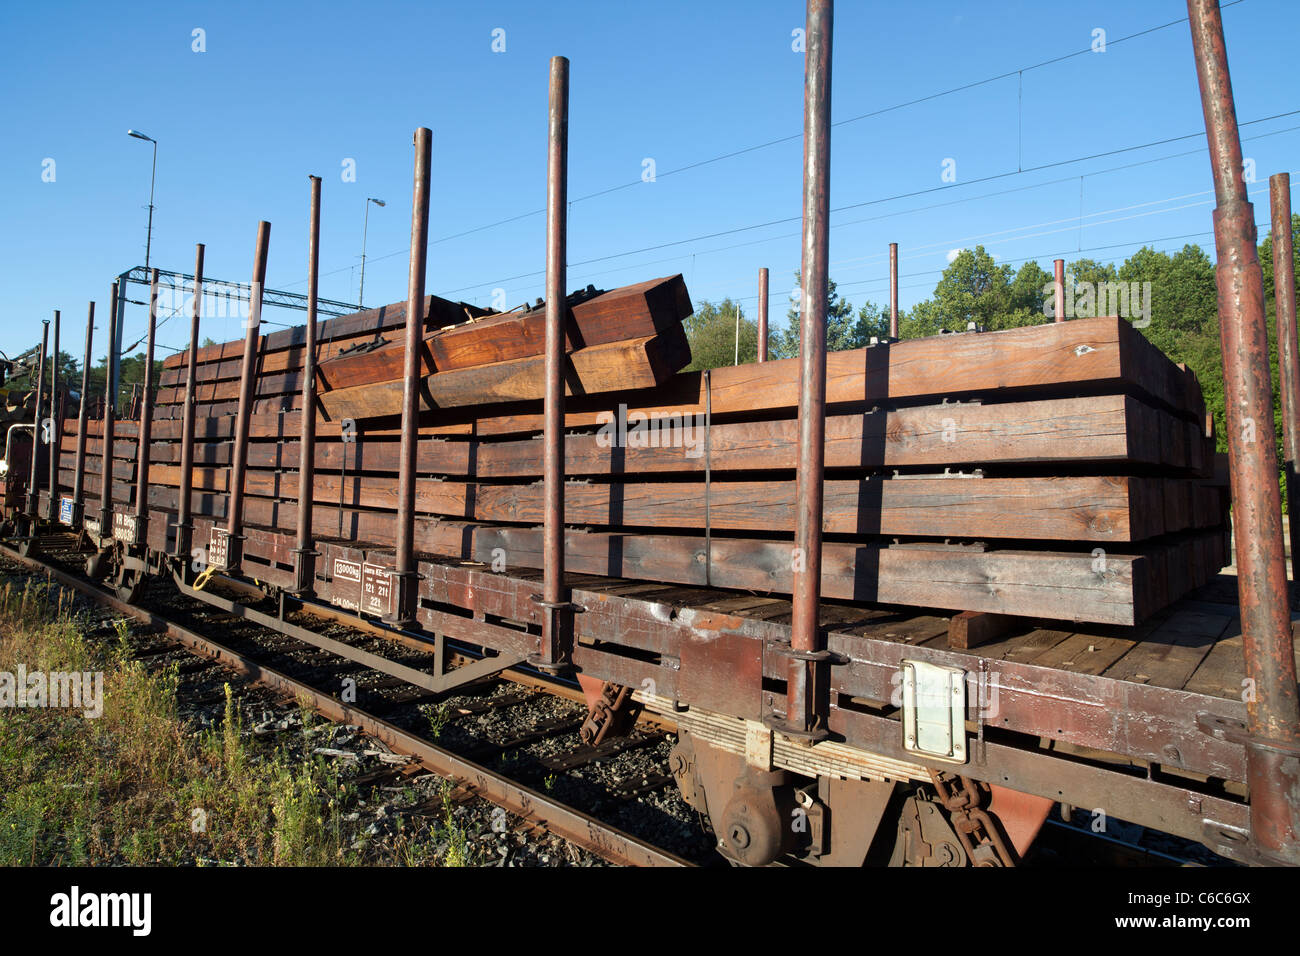 Trainload of brand new wooden railroad ties , Finland Stock Photo